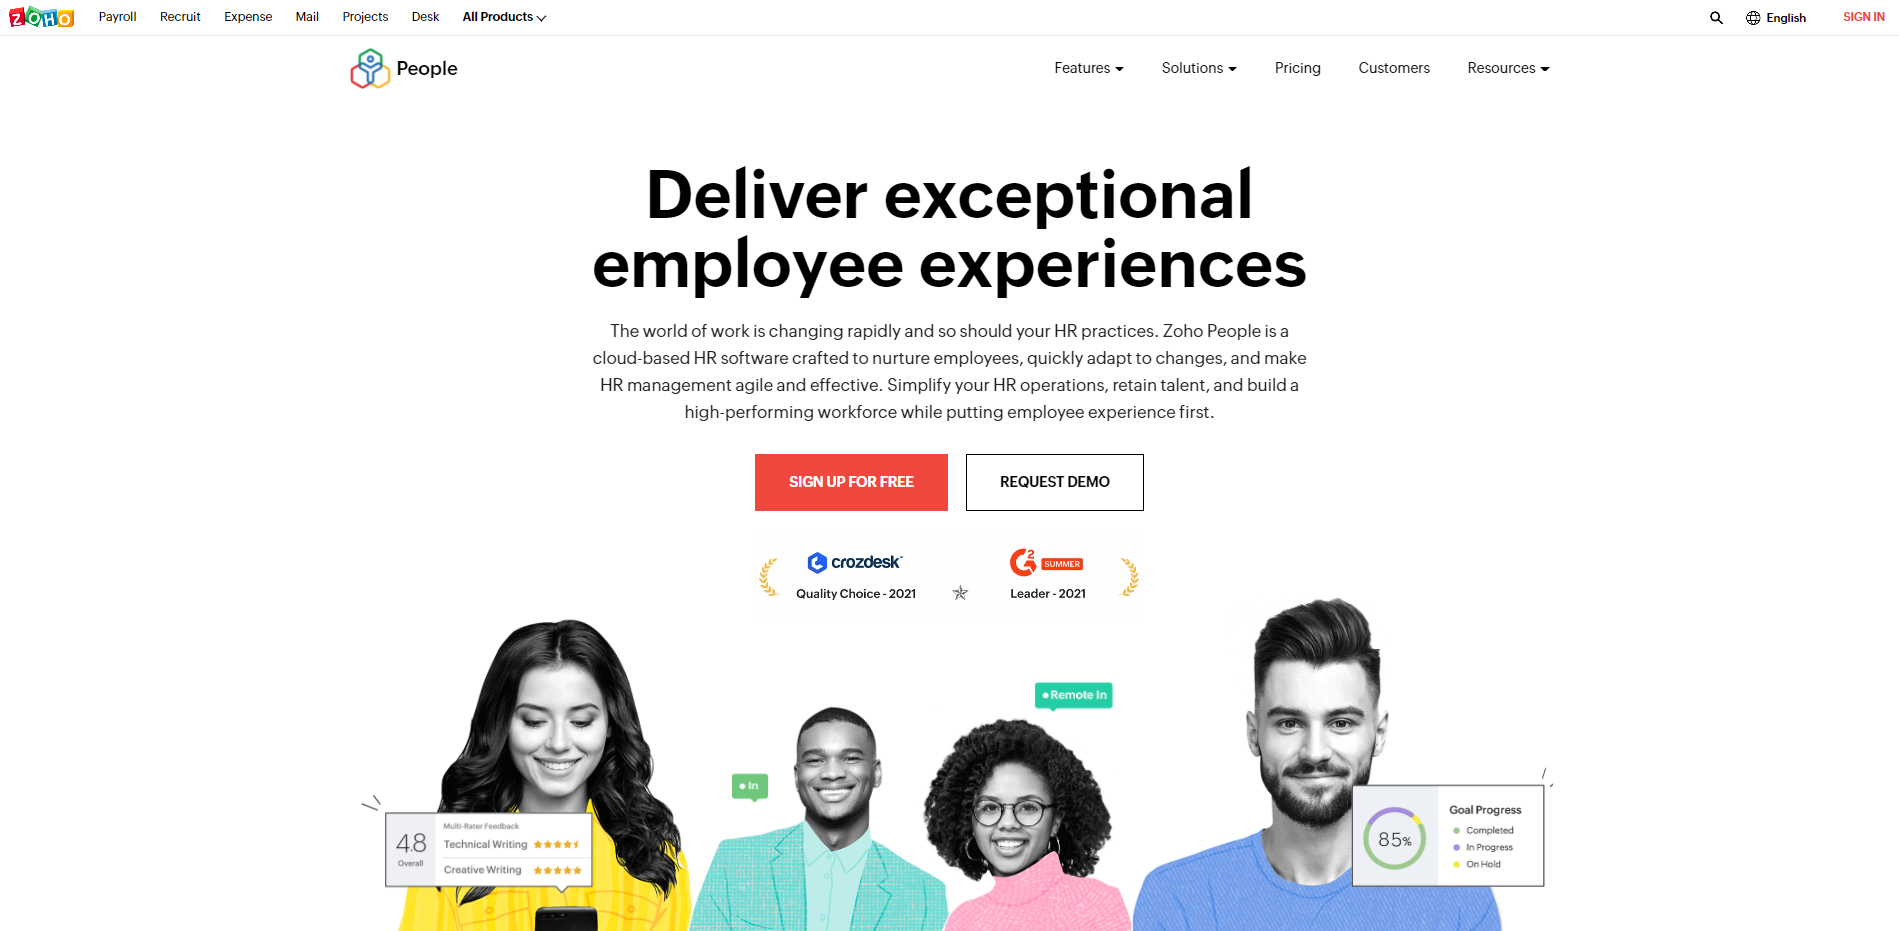 Zoho People - SaaS tools for startups